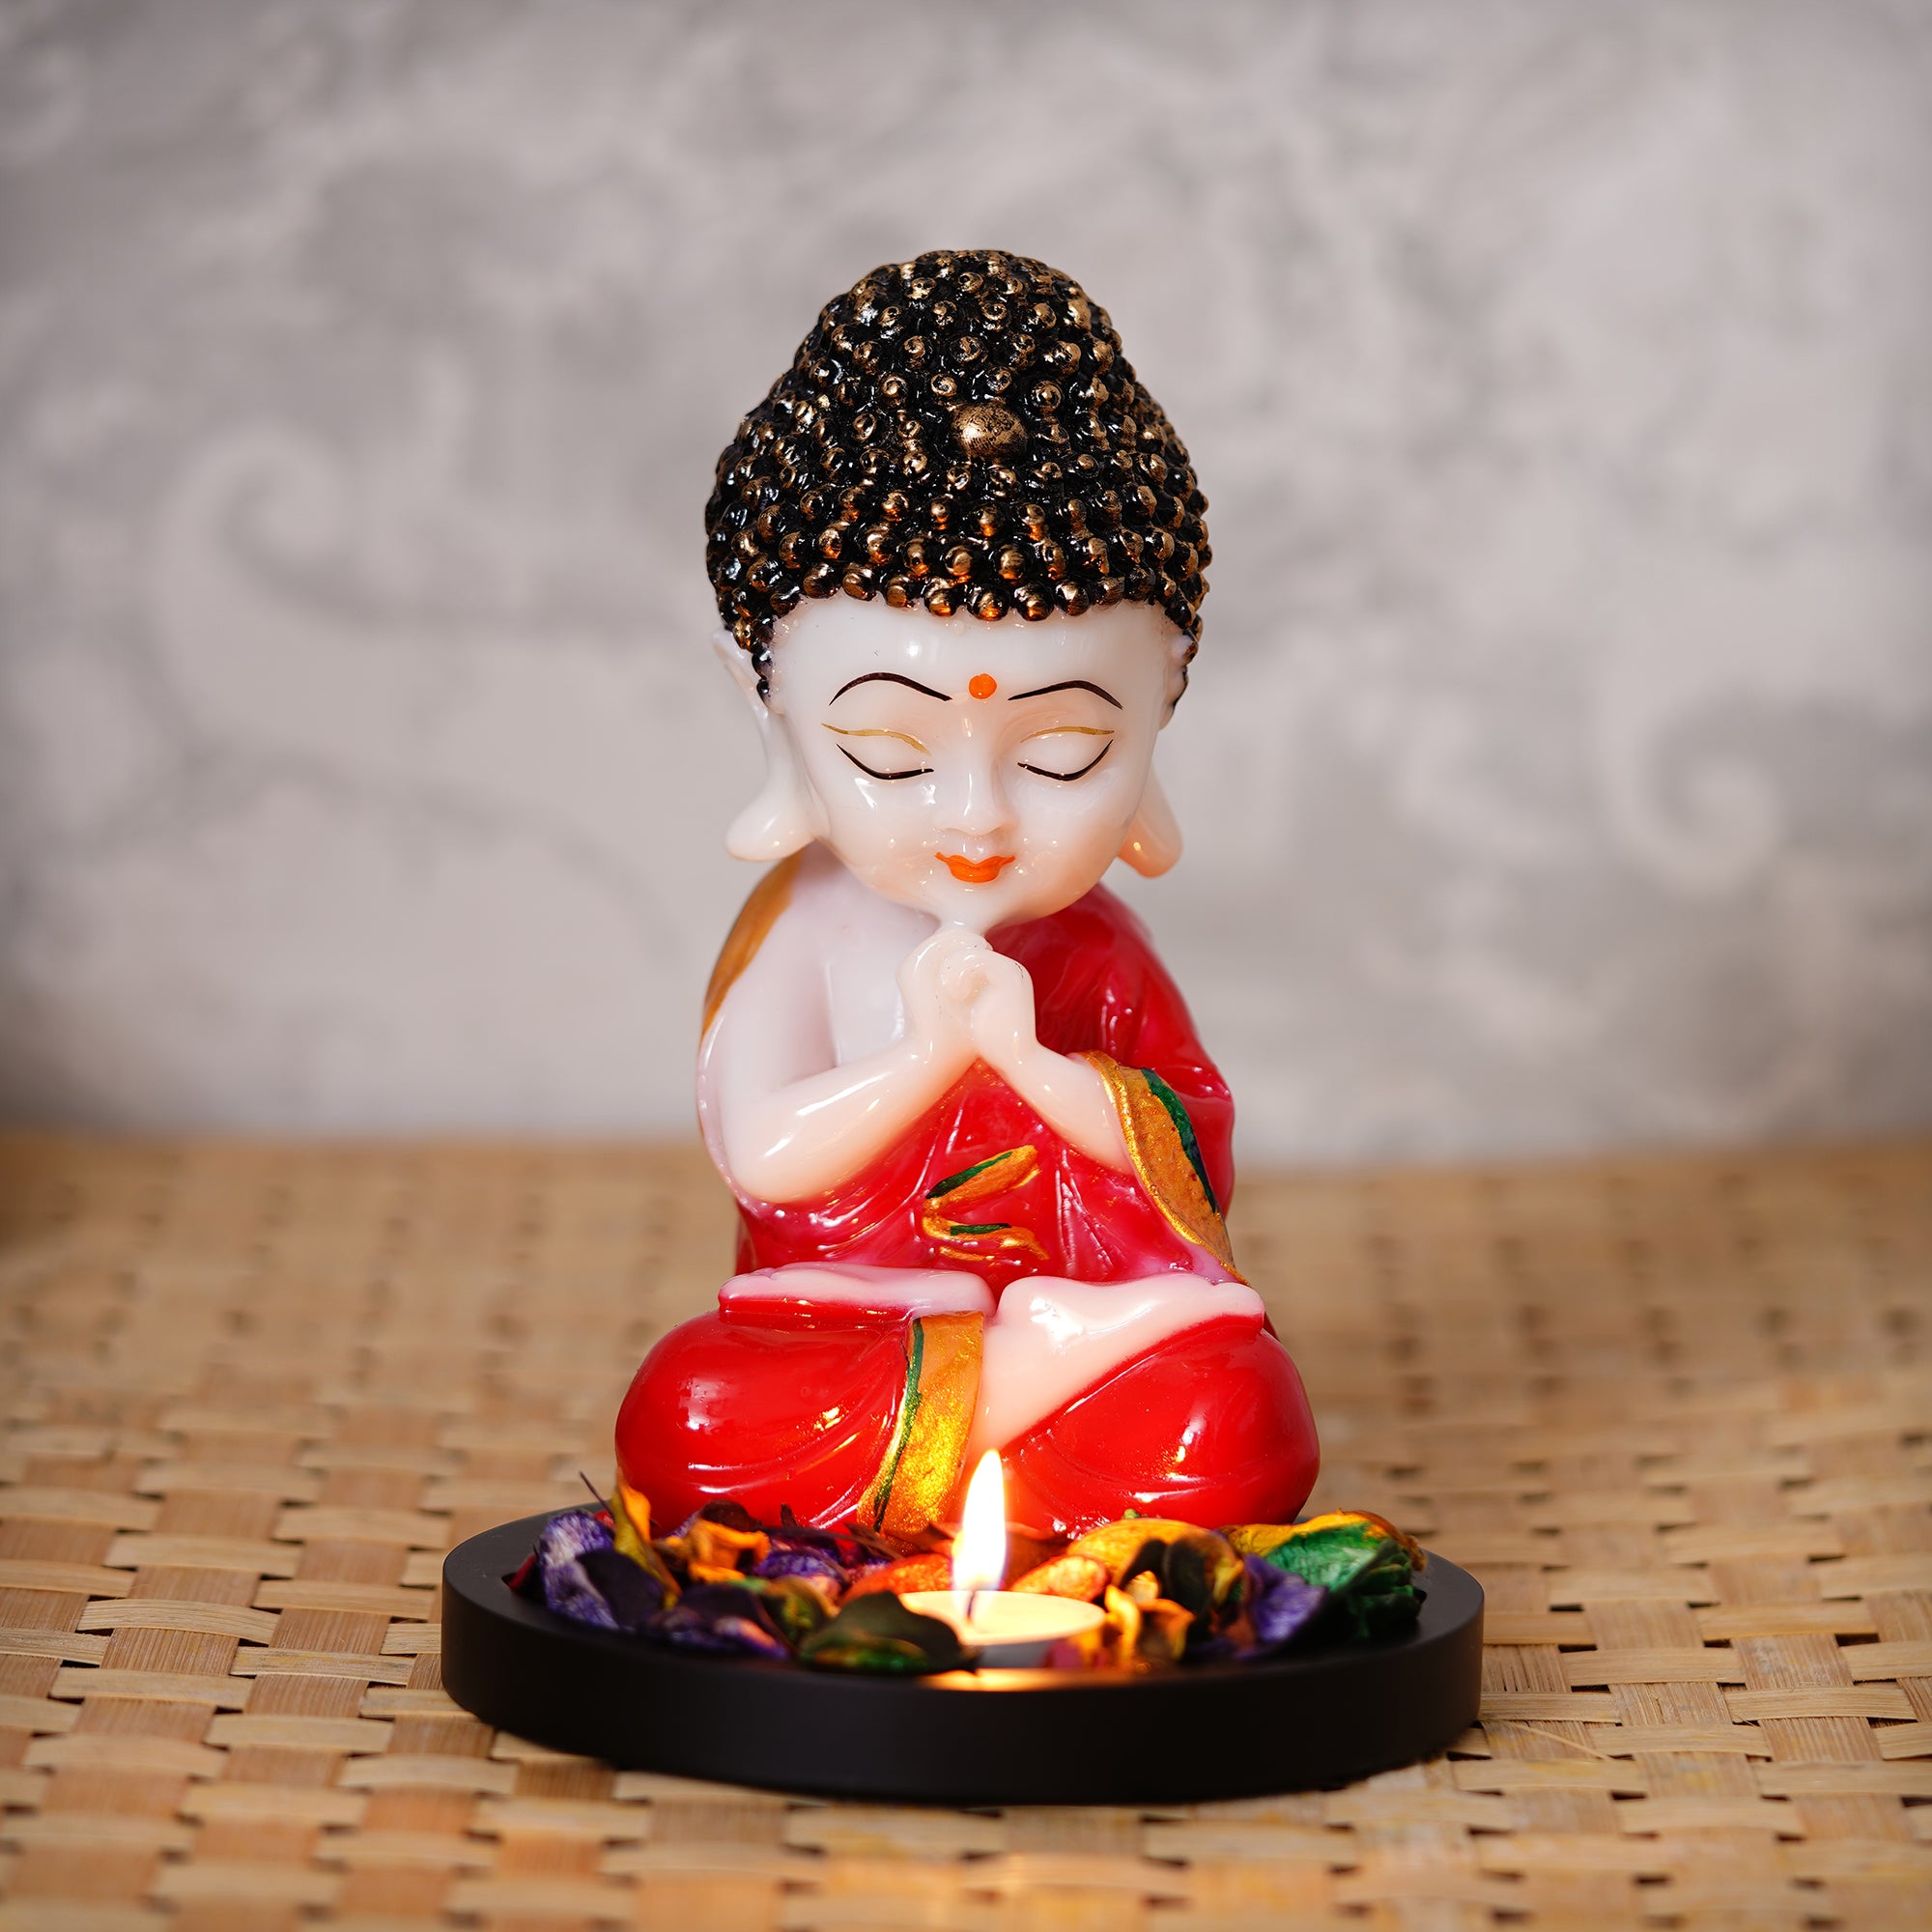 Designer Handcrafted Stone Pearl Rakhi with Praying Red Monk Buddha with Wooden Base, Fragranced Petals and Tealight and Roli Chawal Pack, Best Wishes Greeting Card 2